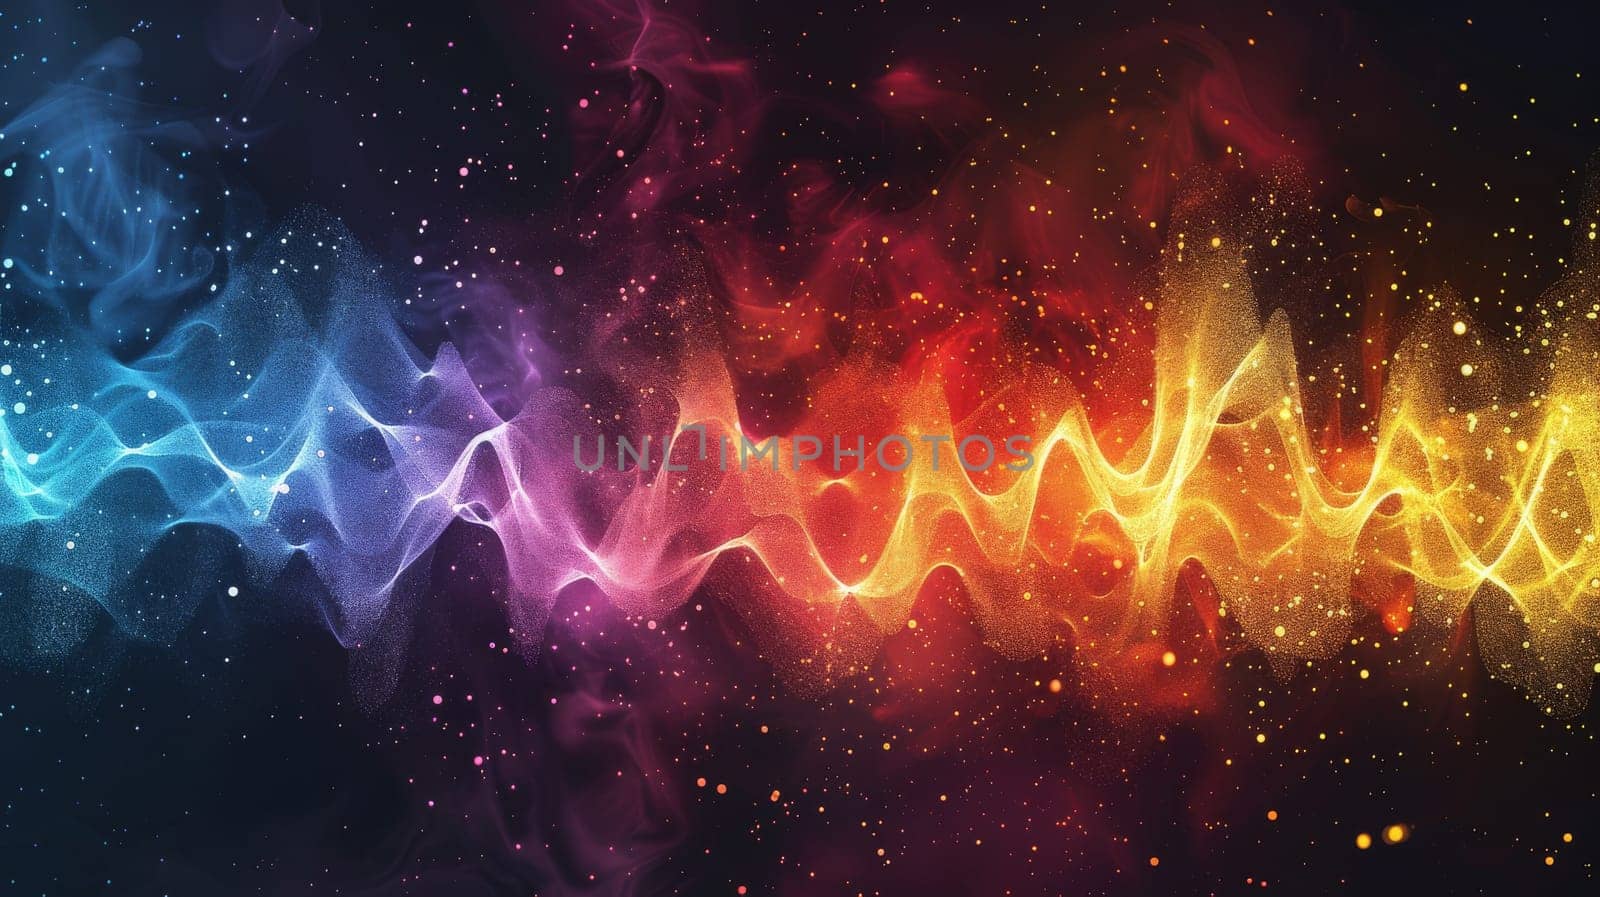 A colorful wave of light with a red and orange section. The wave is surrounded by a dark background